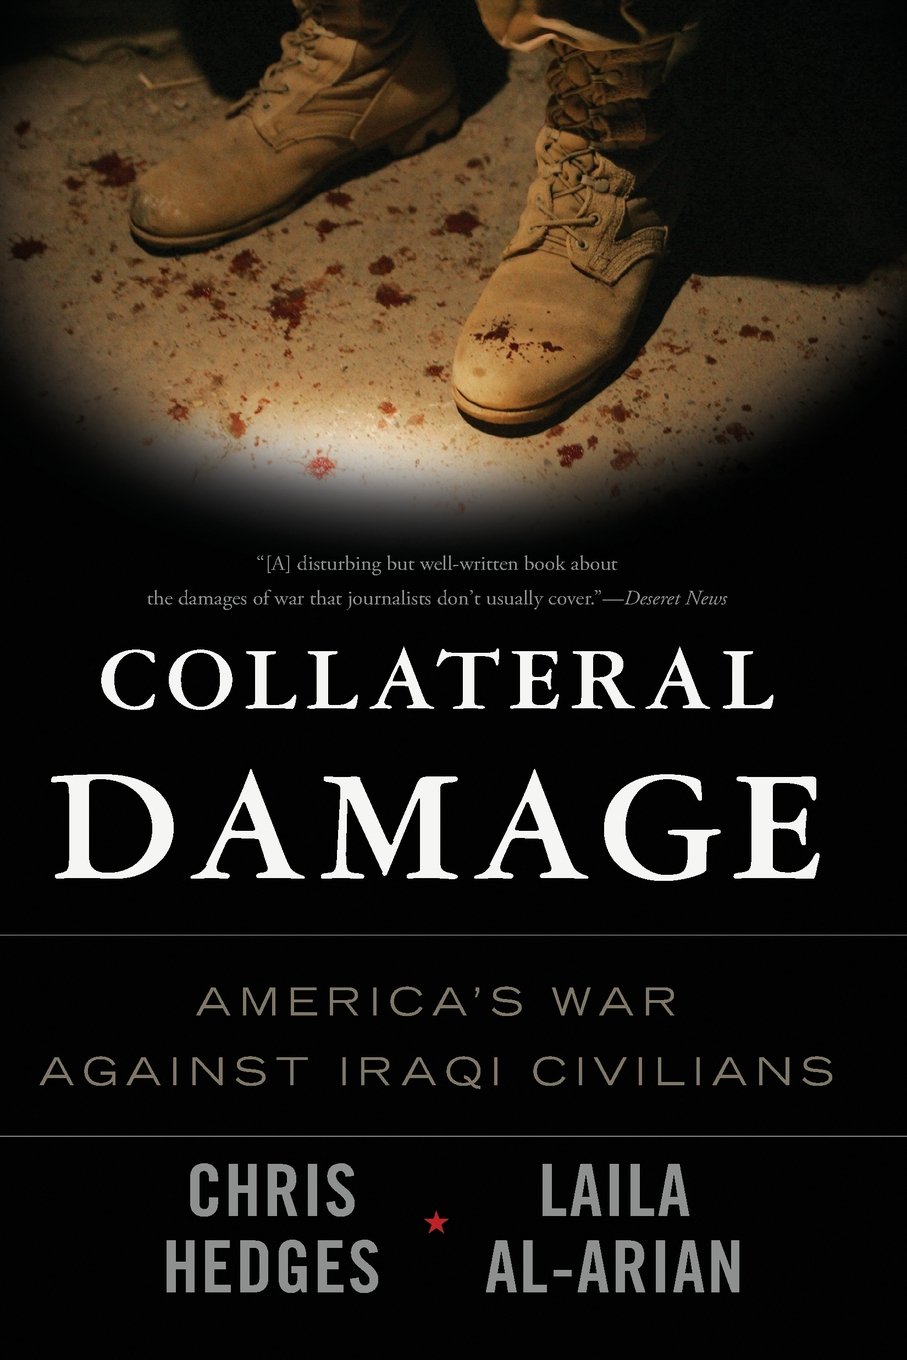 Collateral Damage: American's War Against Iraqi Civilians